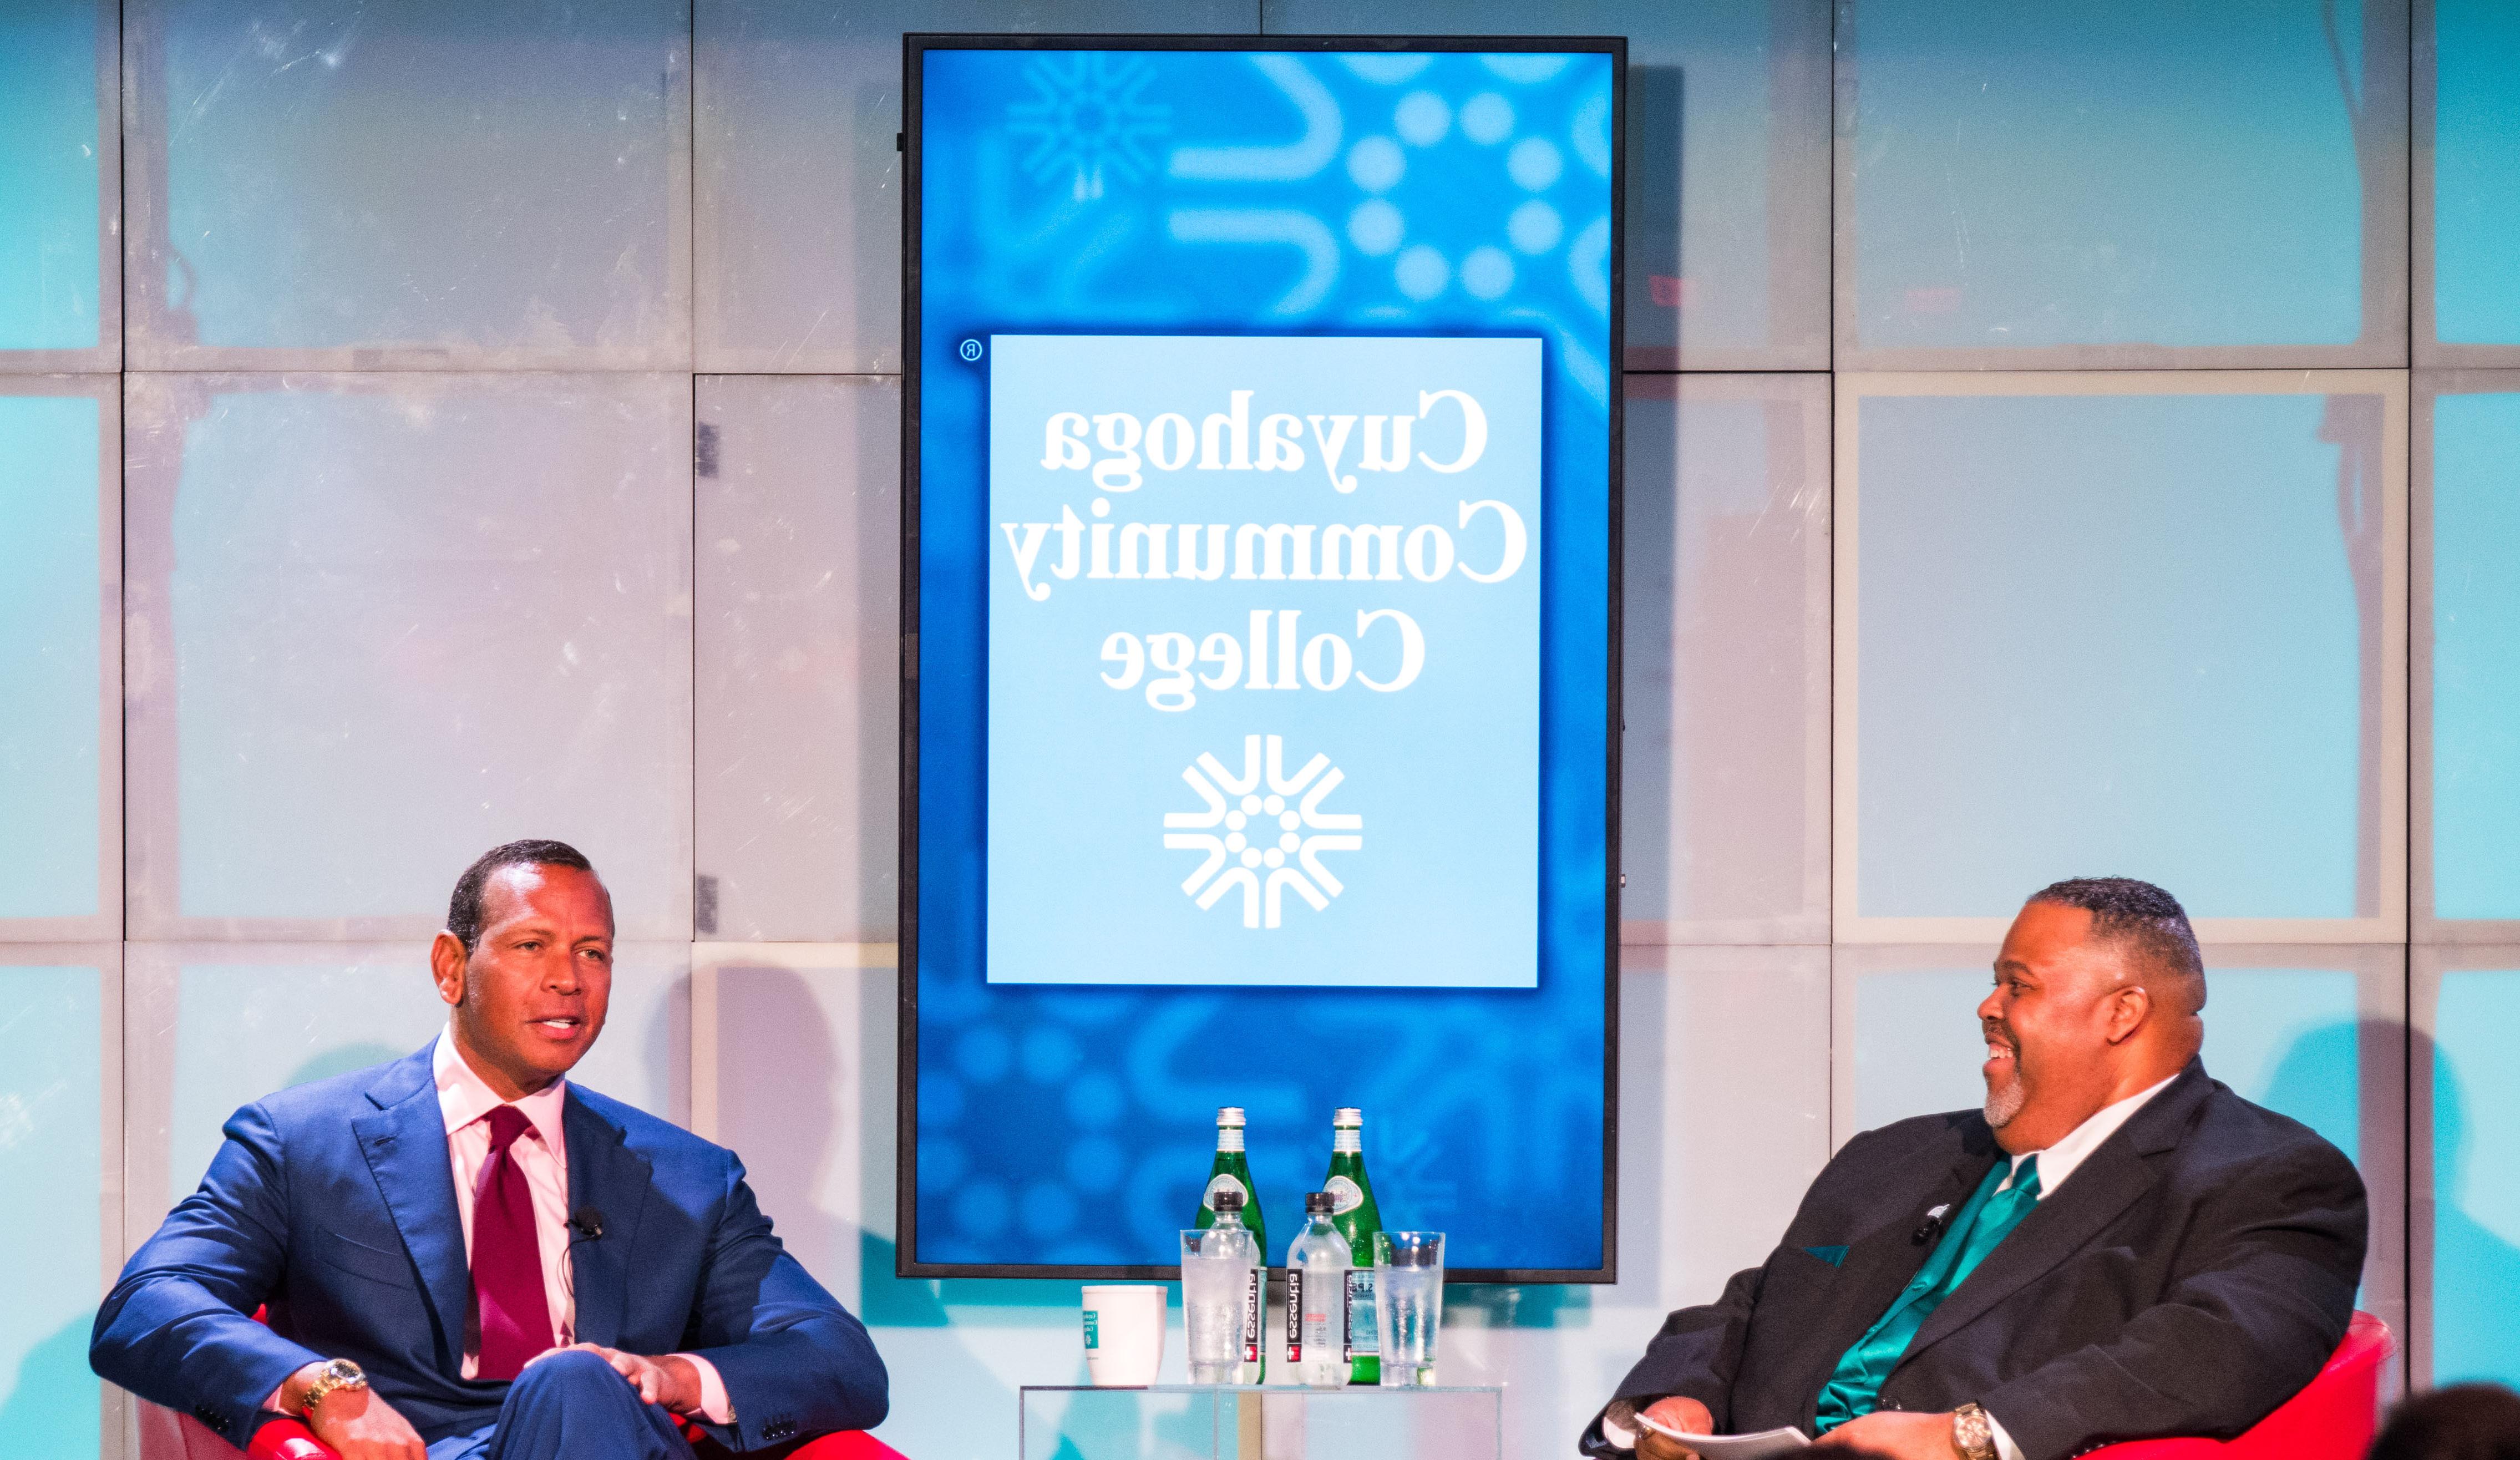 Tri-C President Dr. Michael Baston in conversation with Alex Rodriquez. Seated on stage in red club chairs under the Cuyahoga Community College logo and signage 